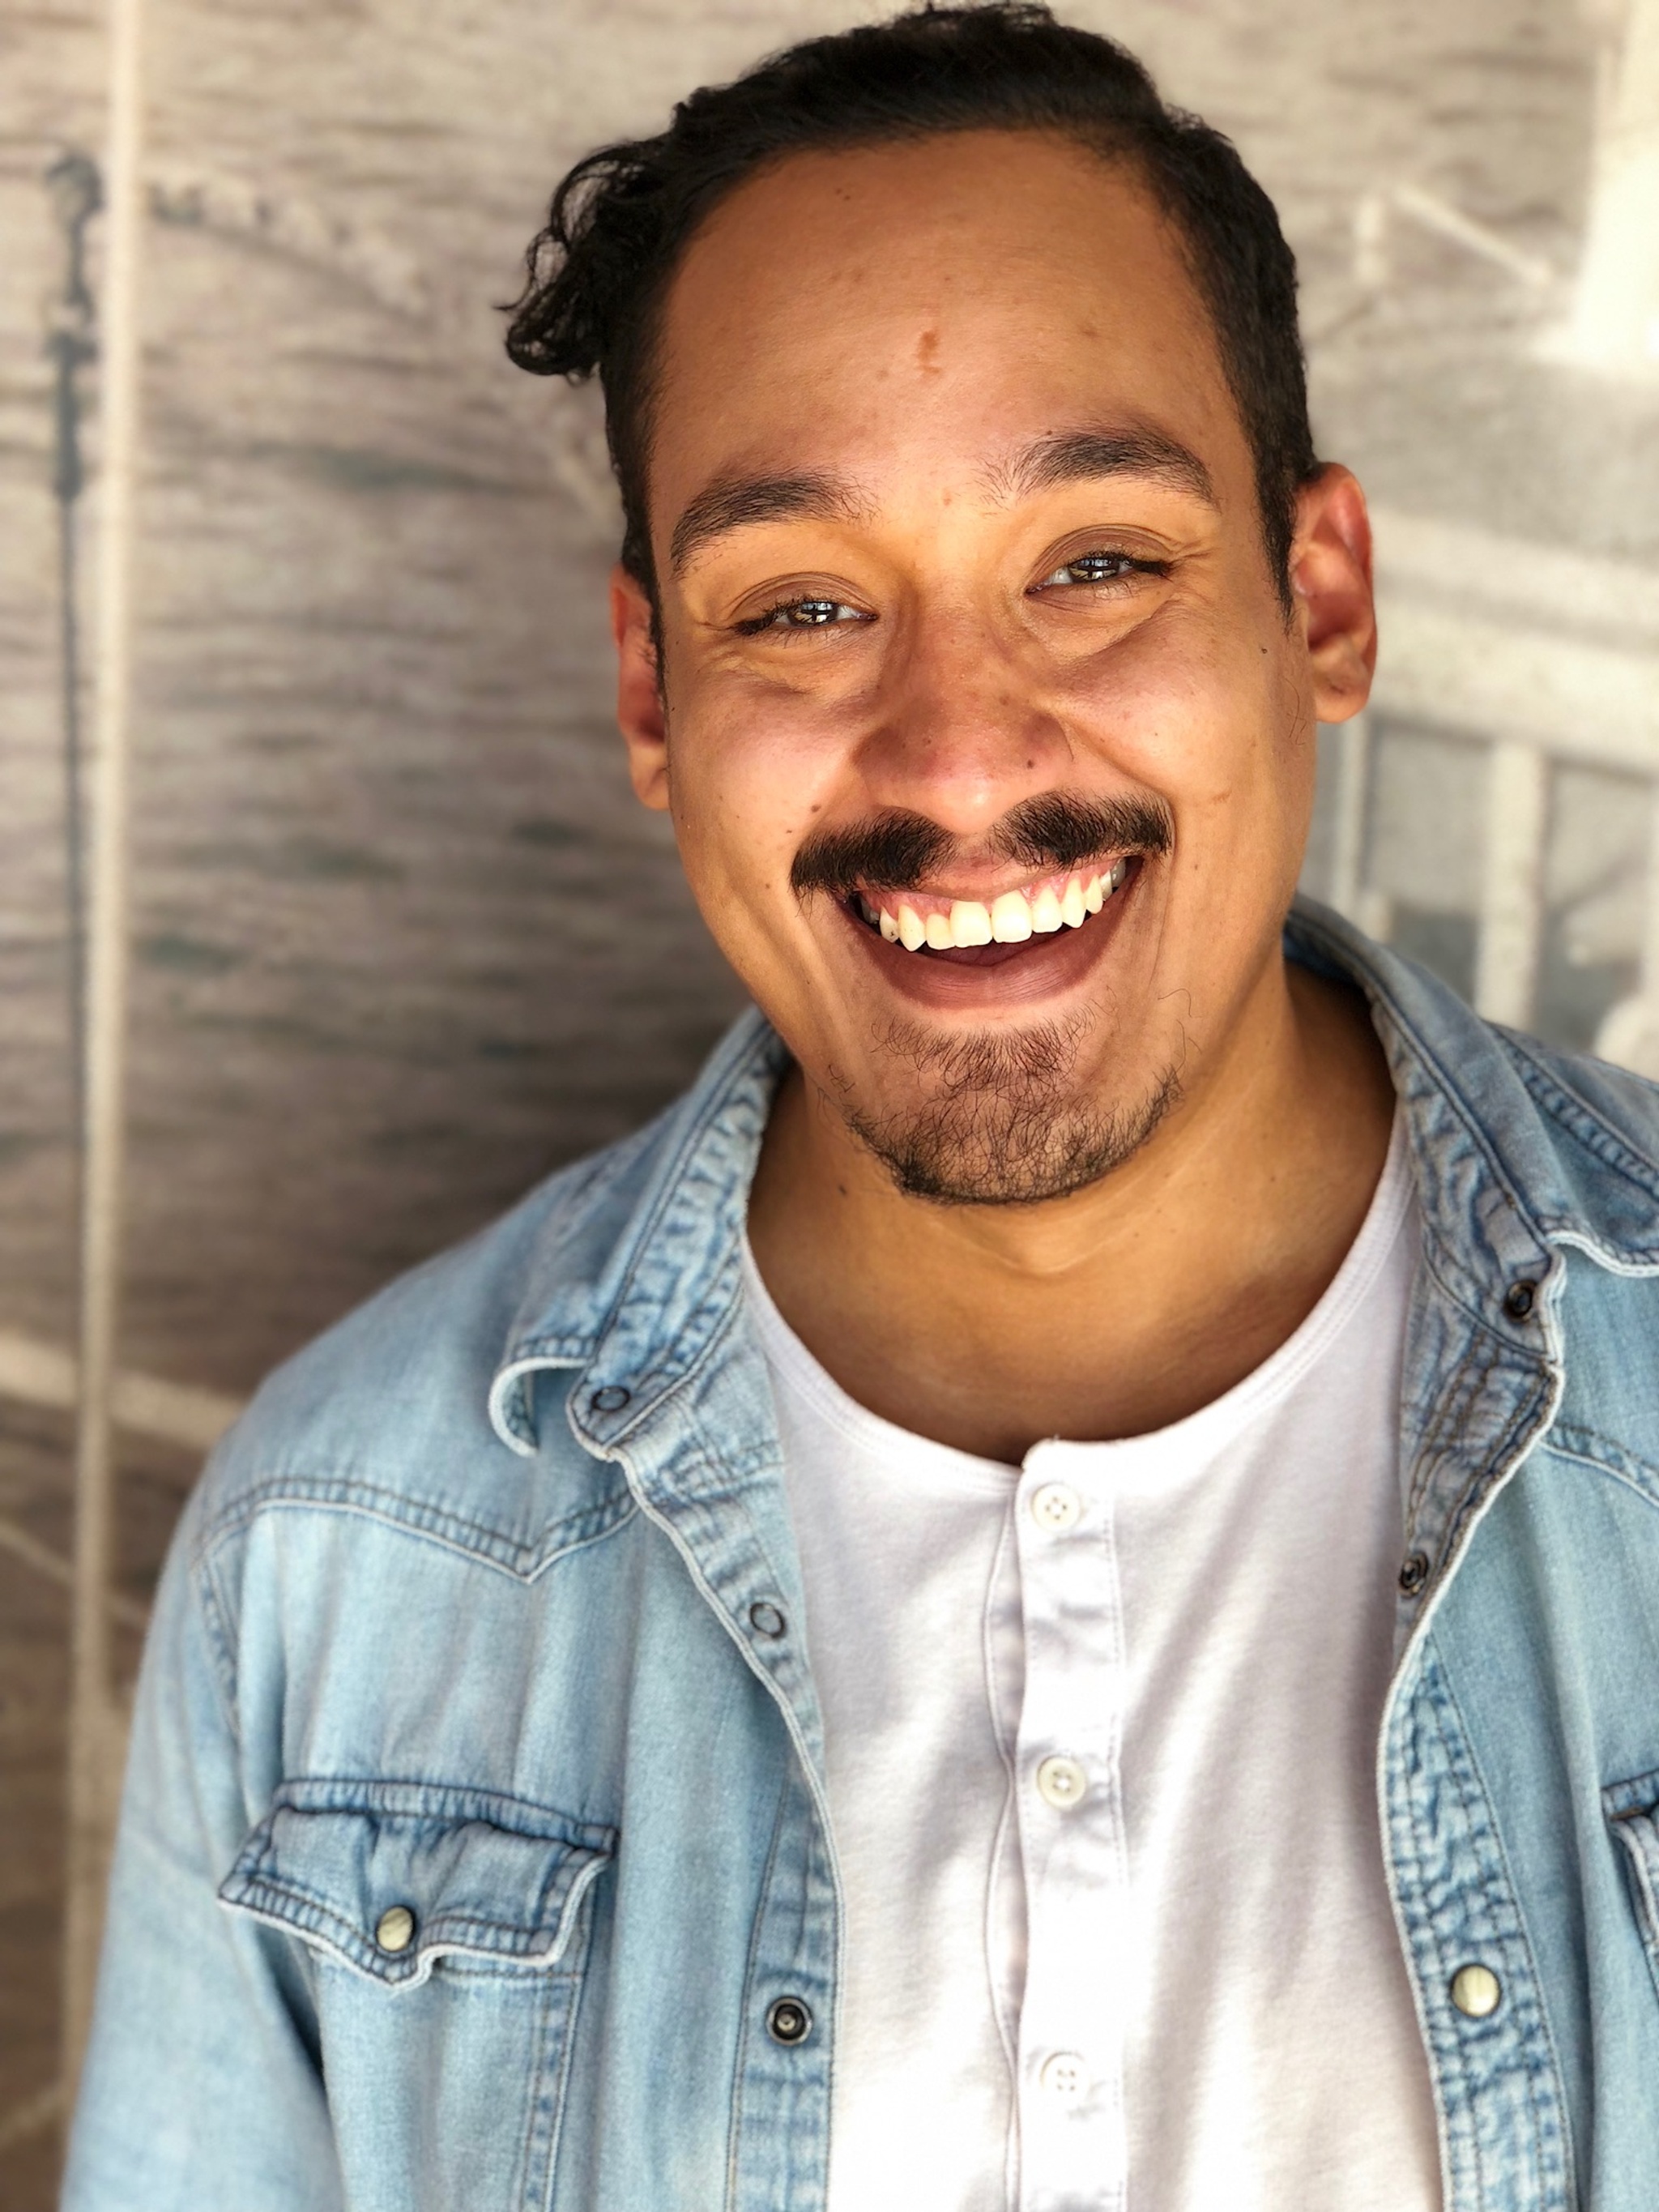 A man smile broadly in a space lit so that light illuminates his face from below. He has dark brown hair combed to the right side and a mustache. He wears a denim shirt open over a white henly tshirt. 